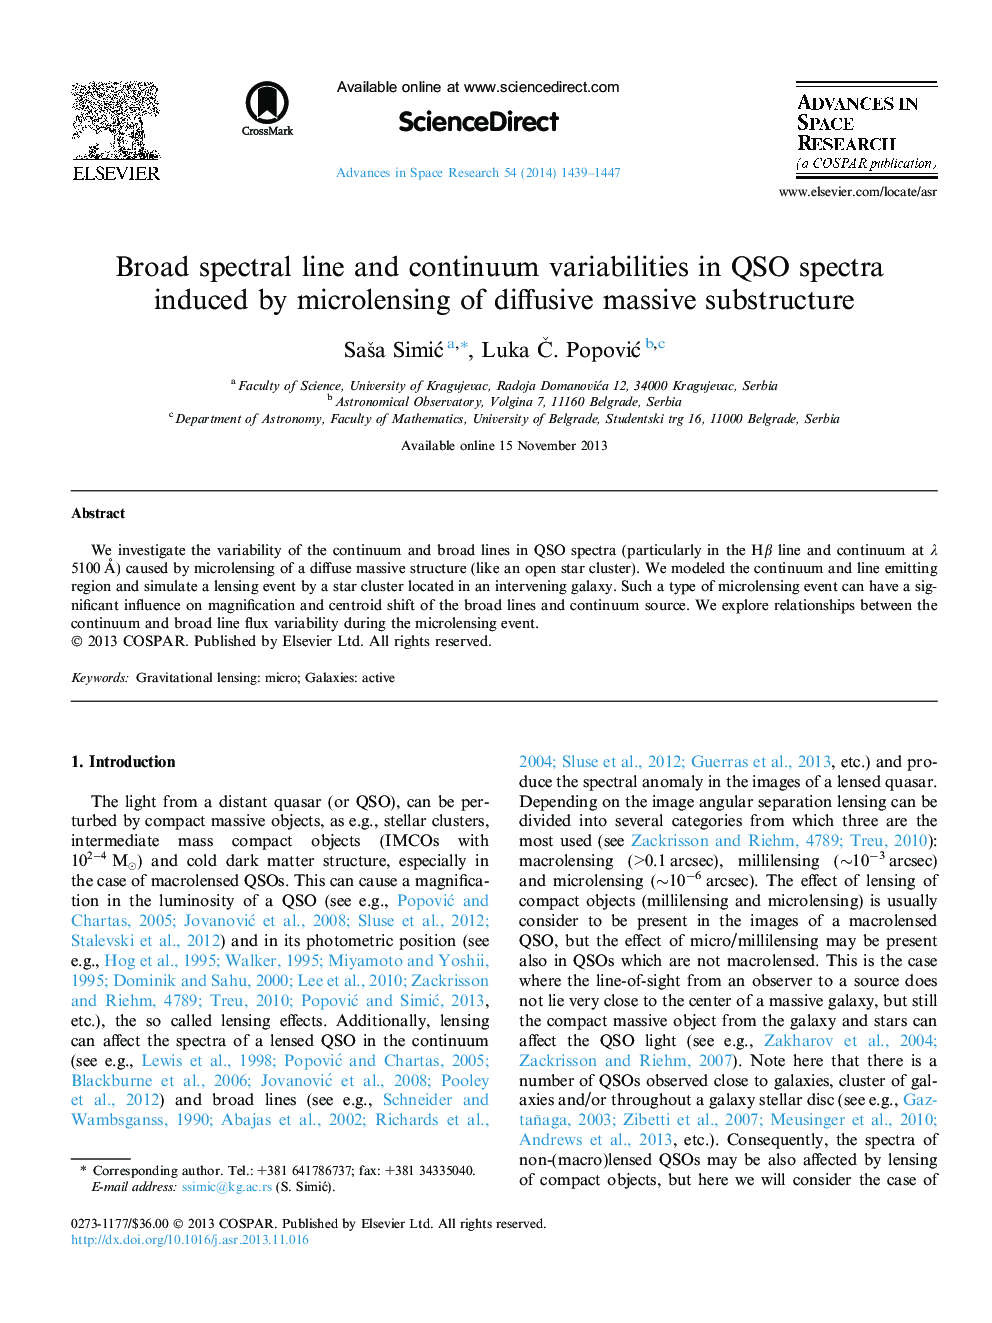 Broad spectral line and continuum variabilities in QSO spectra induced by microlensing of diffusive massive substructure